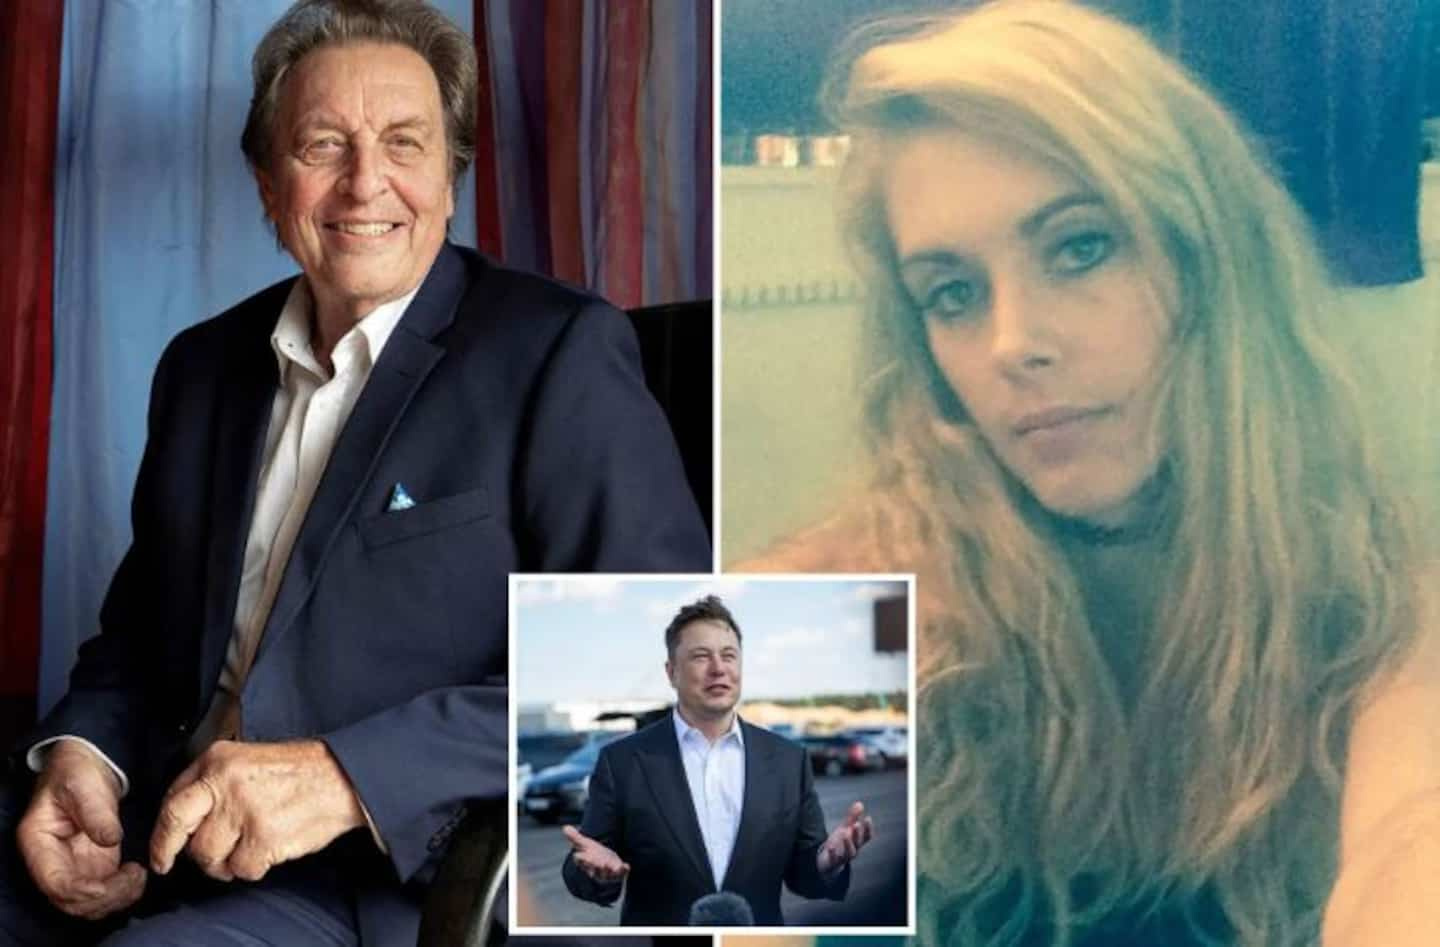 Elon Musk's father confirms he had a daughter with his stepdaughter